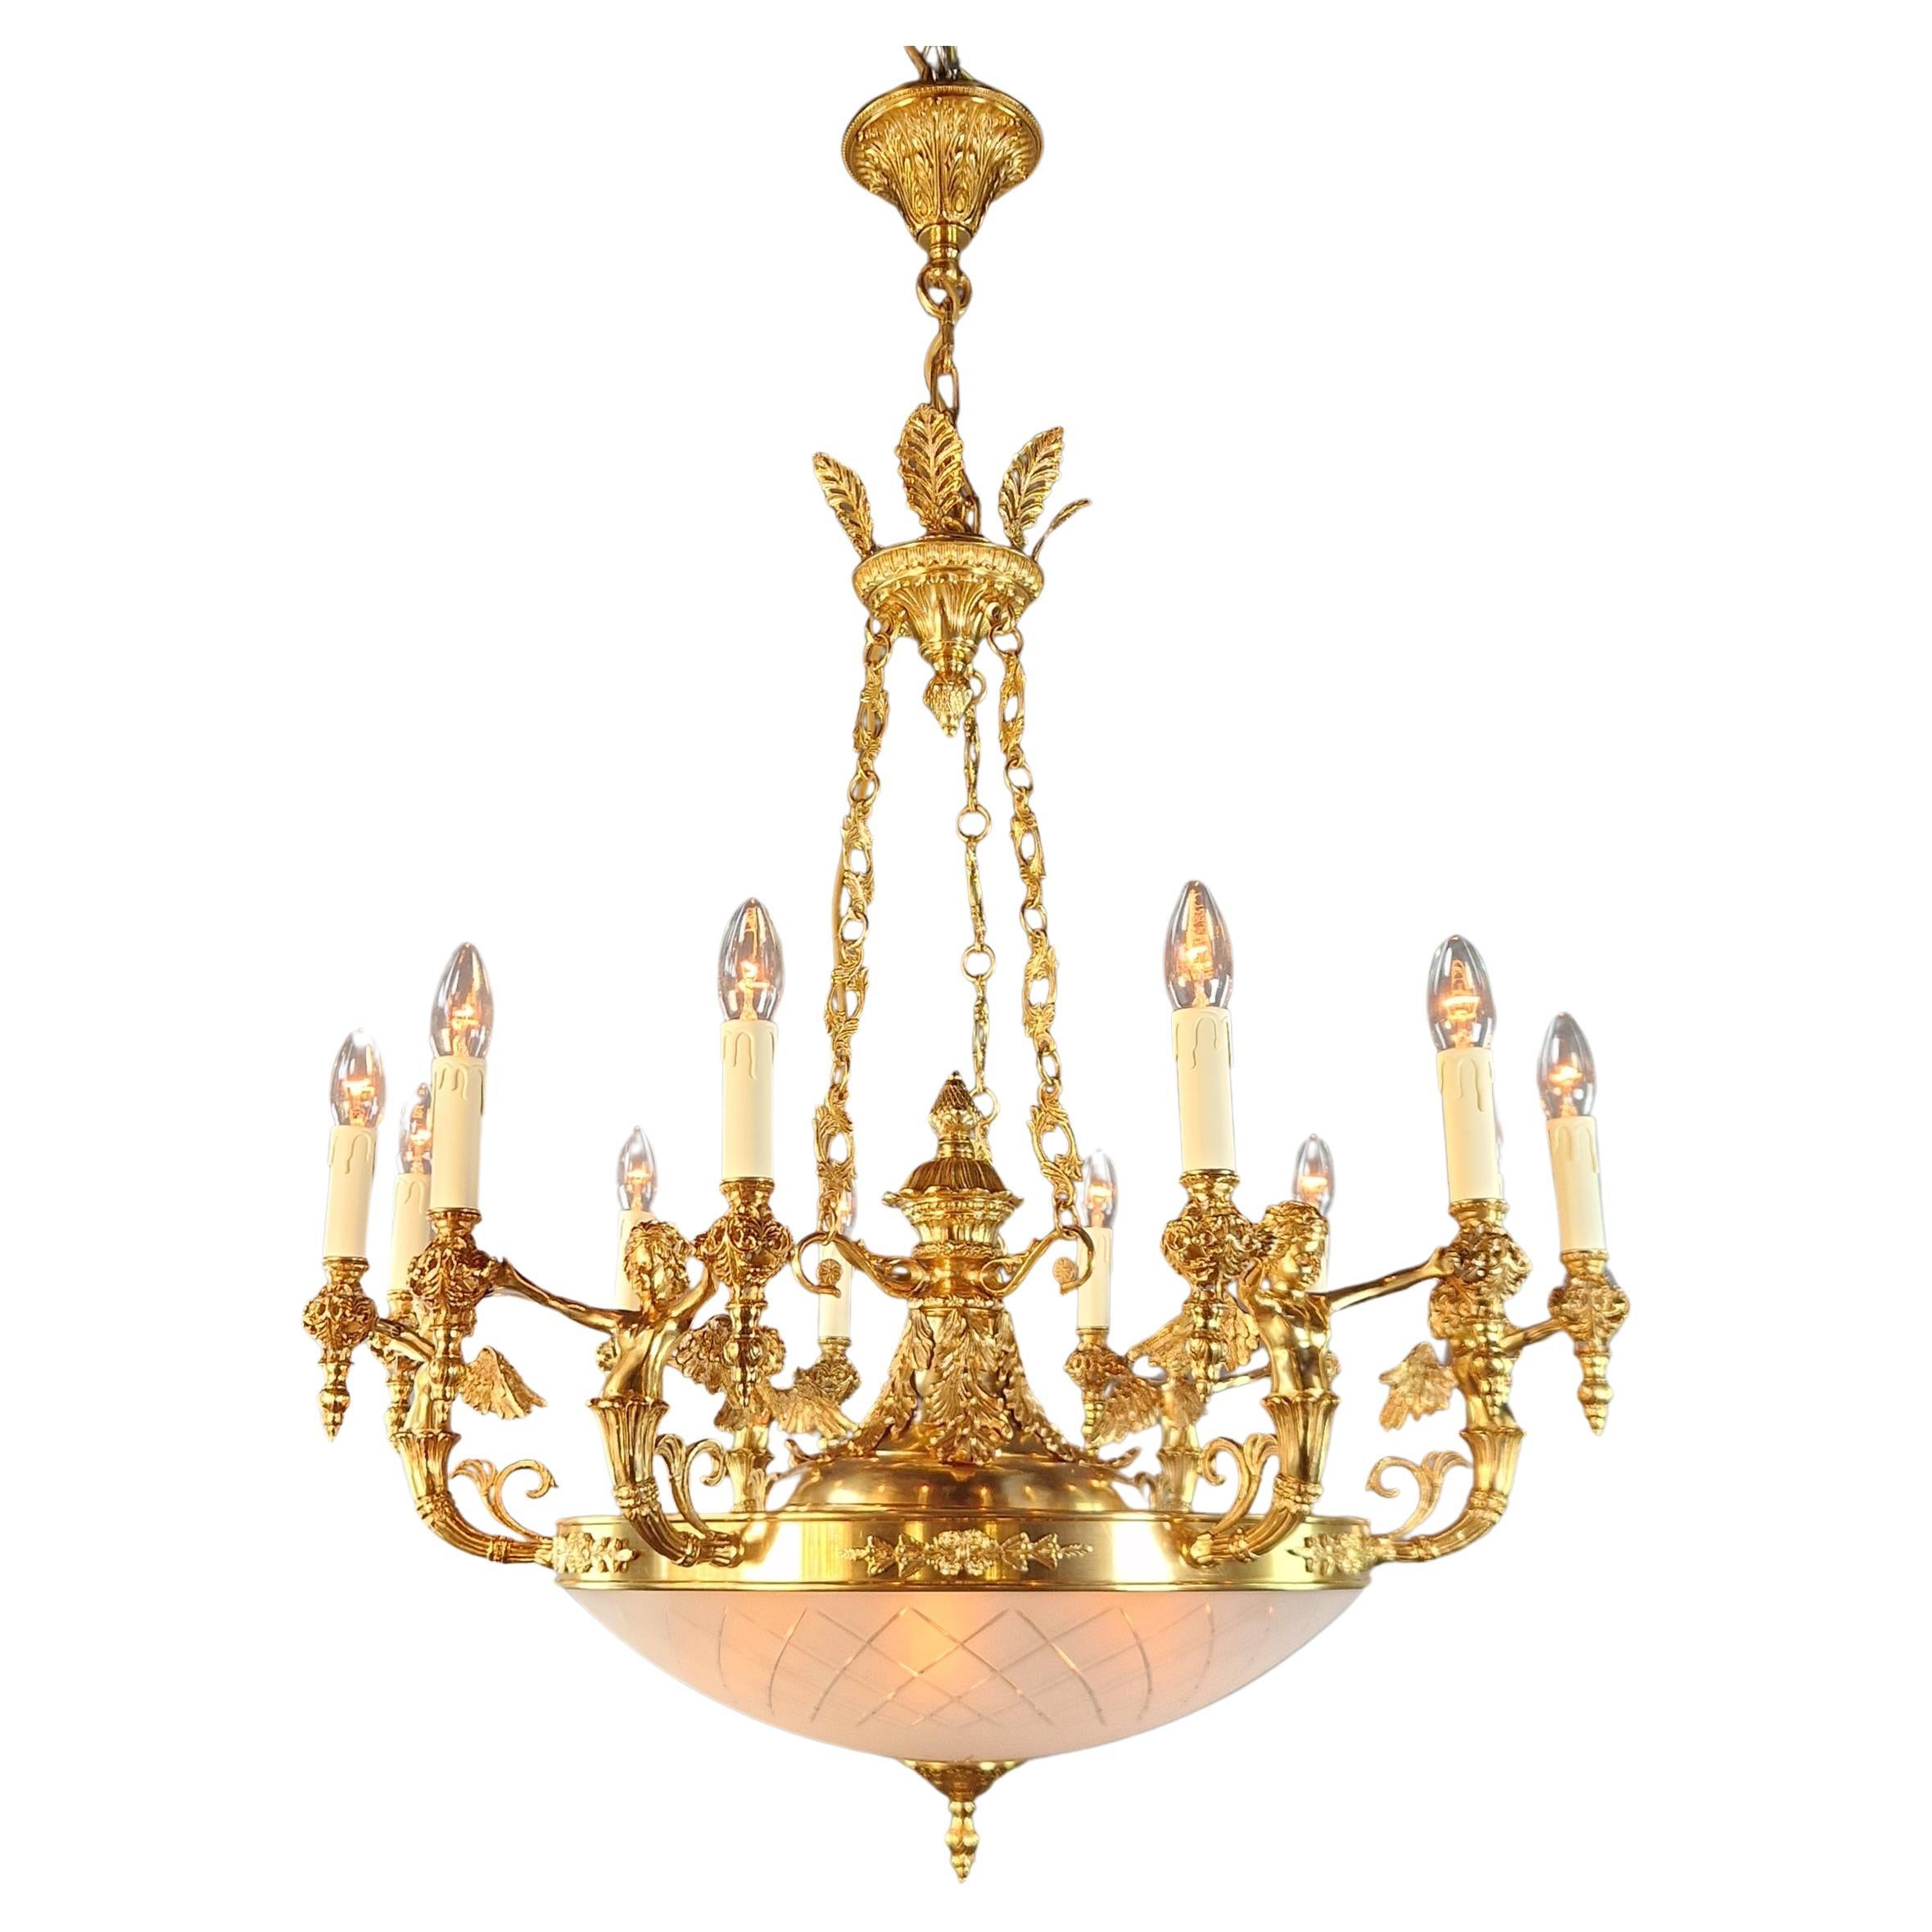 Introducing a stunning Brass Baroque Empire Chandelier, reminiscent of the classical style of the Empire era. This is a new reproduction, and several are available, ensuring you can bring this classic beauty to your space.

Measuring a total height